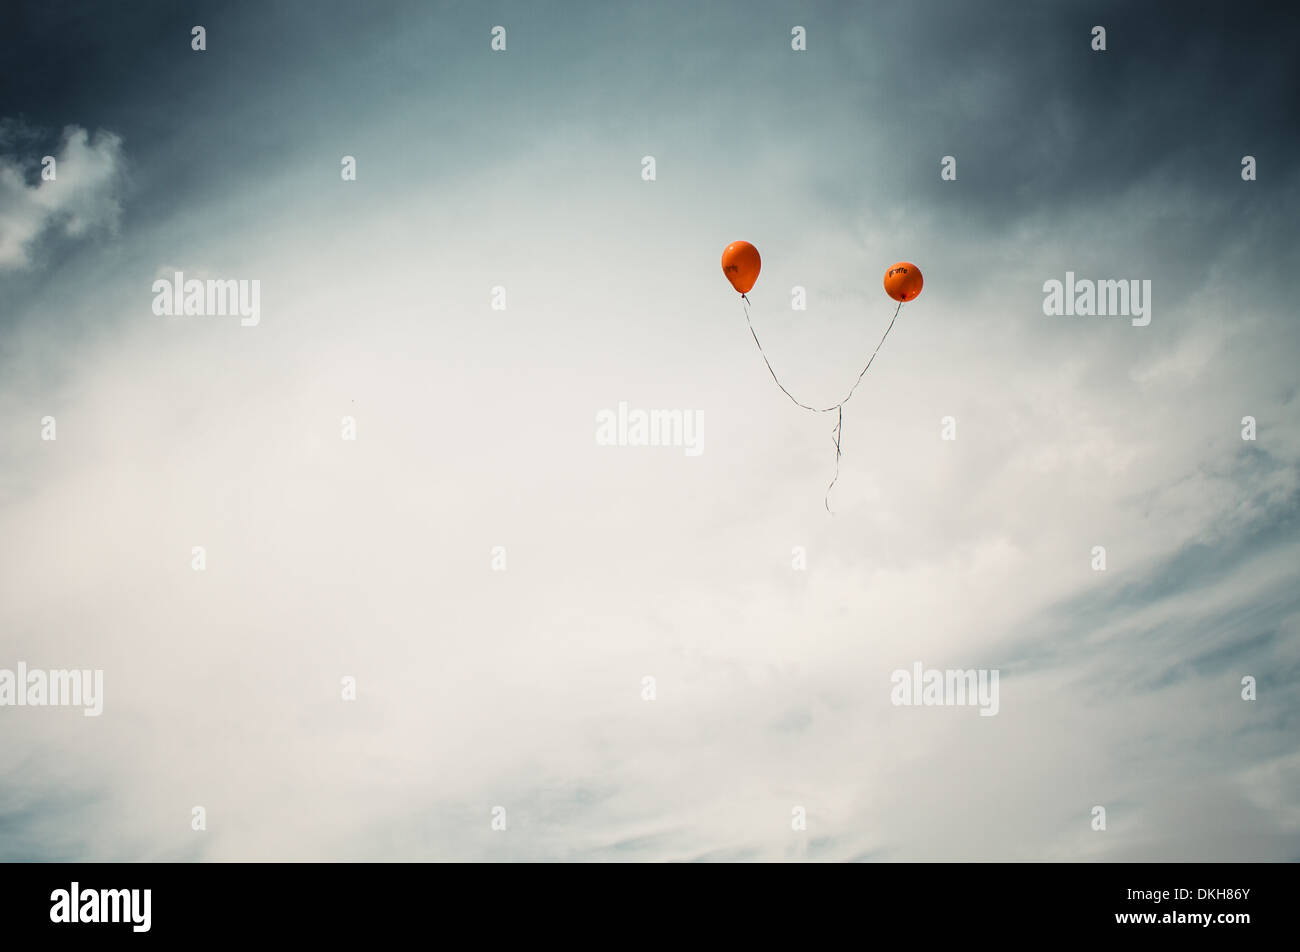 Two orange balloons floating against a cloudy sky Stock Photo